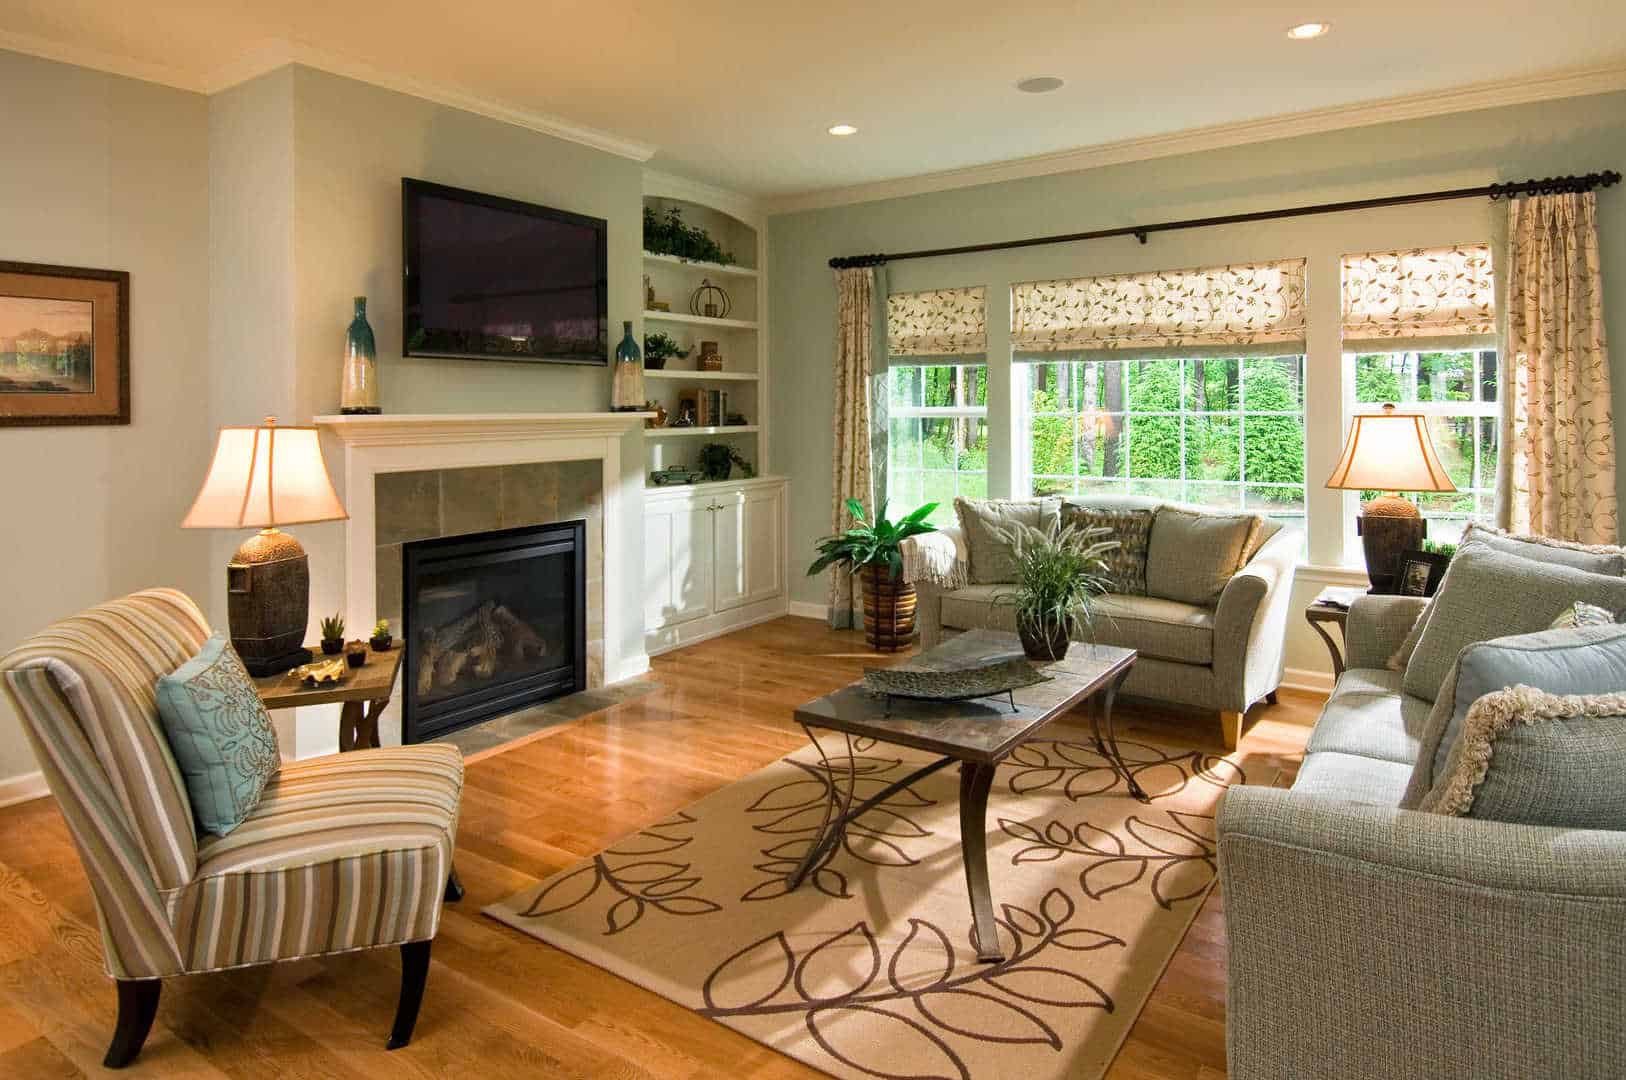 Great Room with Hardwood, Furniture, Built-Ins and a Gas Fireplace with Tile Surround